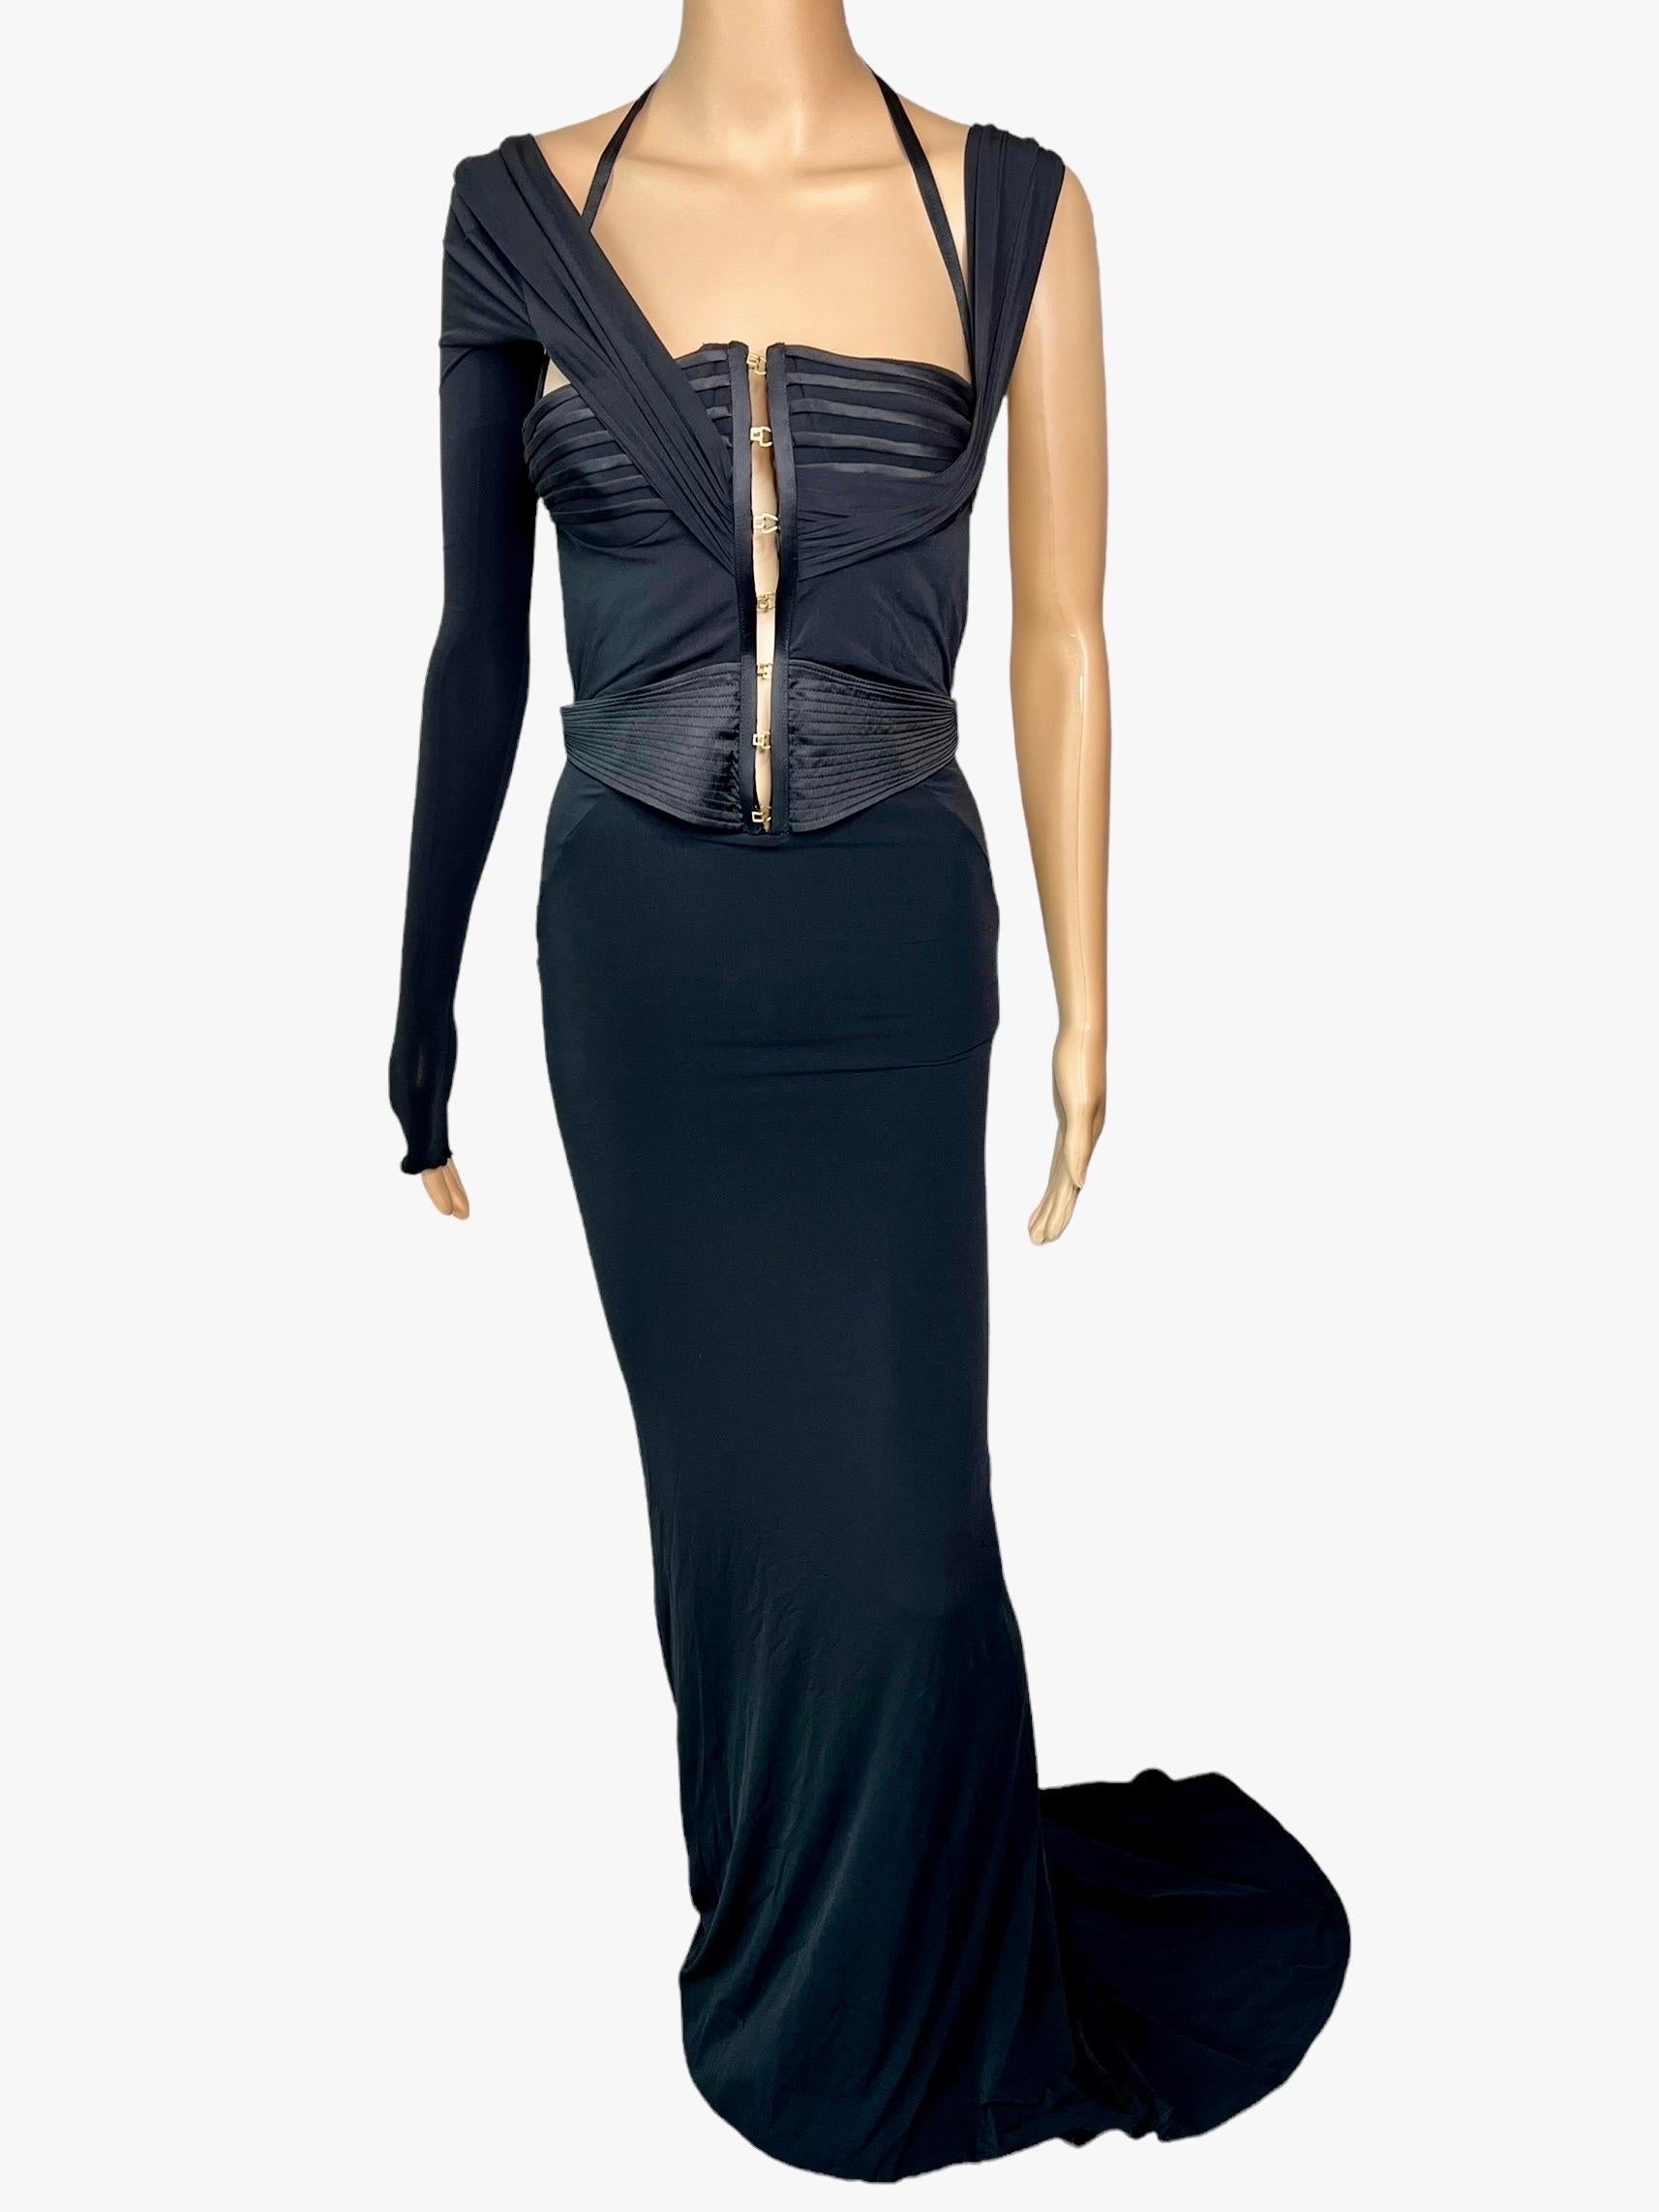 Tom Ford for Gucci F/W 2003 Bustier Corset Cutout Train Black Evening Dress Gown 1